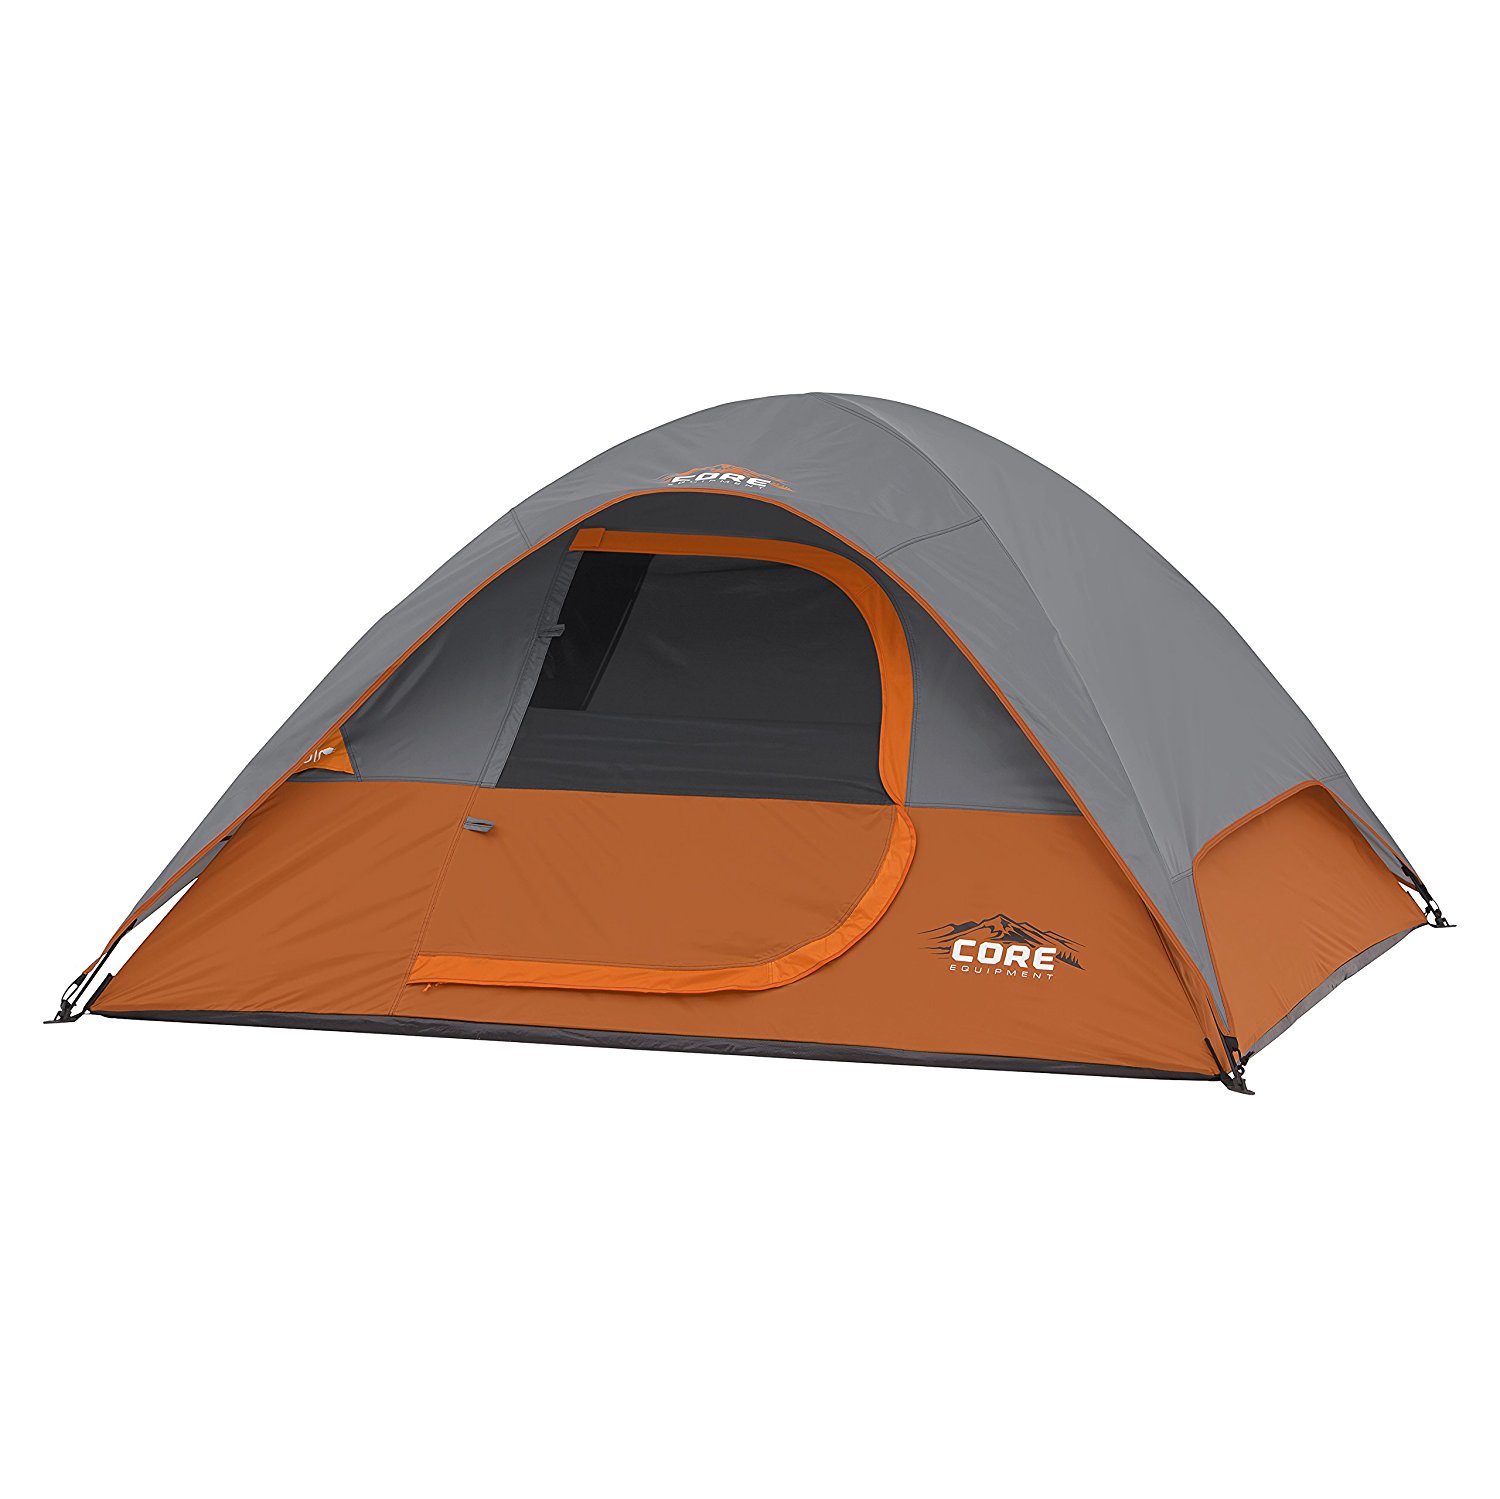 Core 3 Person Dome Tent Only $40.98 Shipped!